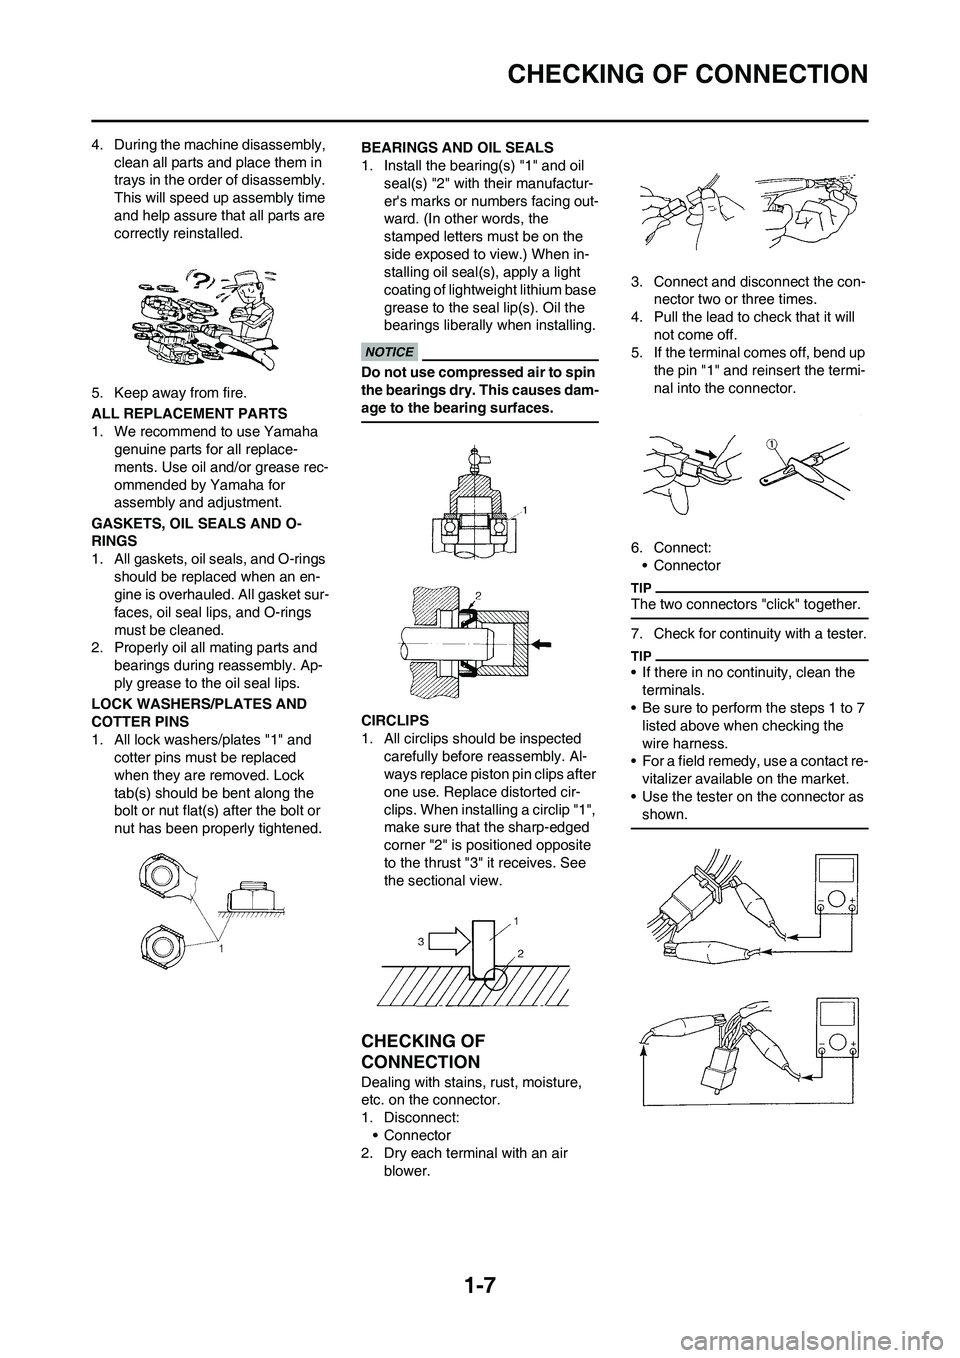 YAMAHA YZ125LC 2010  Owners Manual 1-7
CHECKING OF CONNECTION
4. During the machine disassembly, 
clean all parts and place them in 
trays in the order of disassembly. 
This will speed up assembly time 
and help assure that all parts a